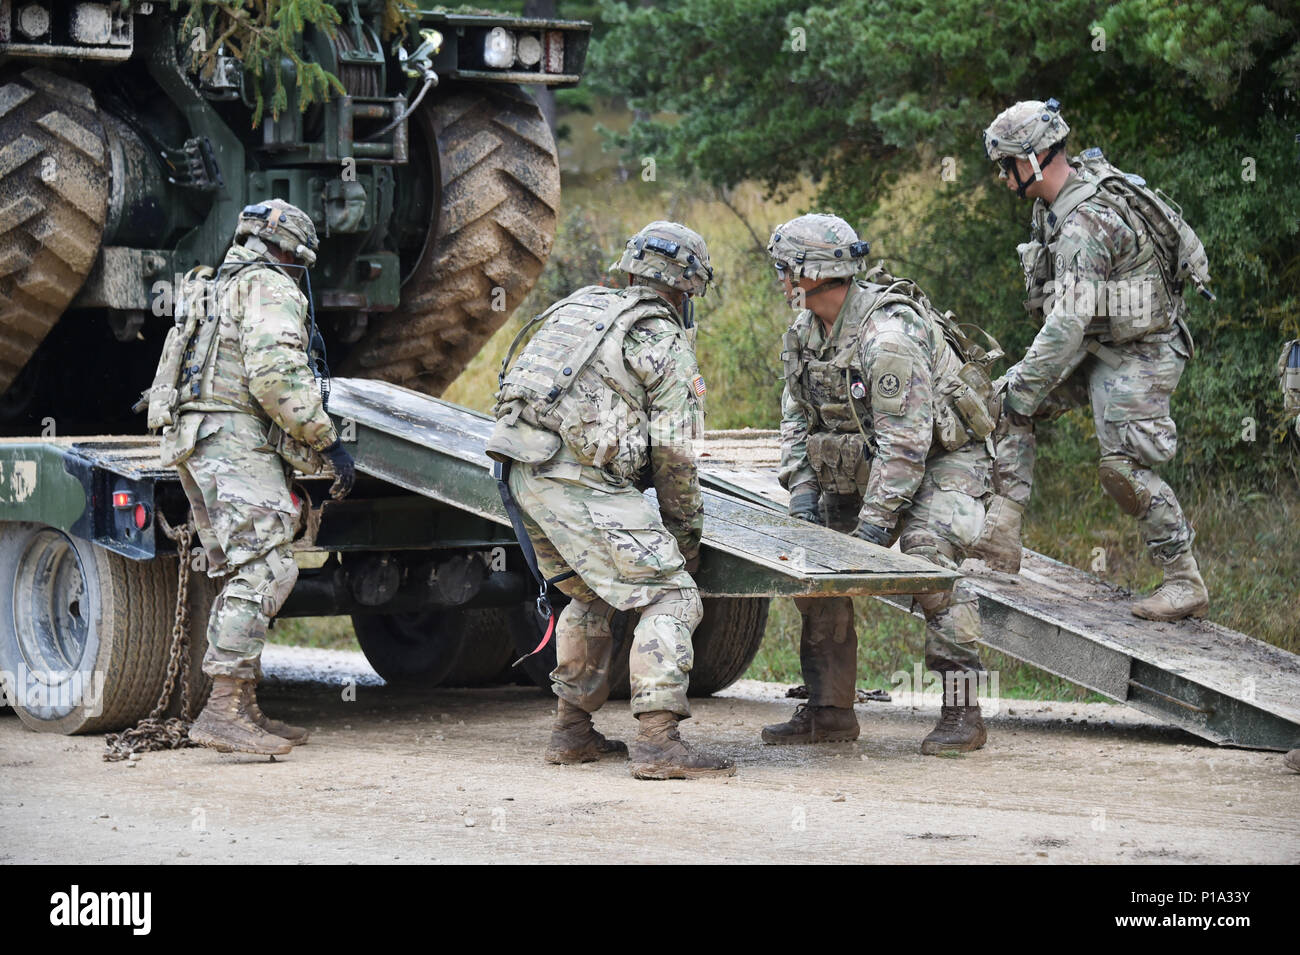 U.S. Soldiers, assigned to Bravo Troop, Regimental Engineer Squadron, 2d Cavalry Regiment, unload a M105 DEUCE-Deployable Universal Combat Earthmover during Exercise Allied Spirit V at 7th Army Training Command’s Hohenfels Training Area, Germany, Oct. 4, 2016. Exercise Allied Spirit includes about 2,520 participants from eight NATO nations, and exercises tactical interoperability and tests secure communications within Alliance members and partner nations.  (U.S. Army photo by Visual Information Specialist Gertrud Zach) Stock Photo